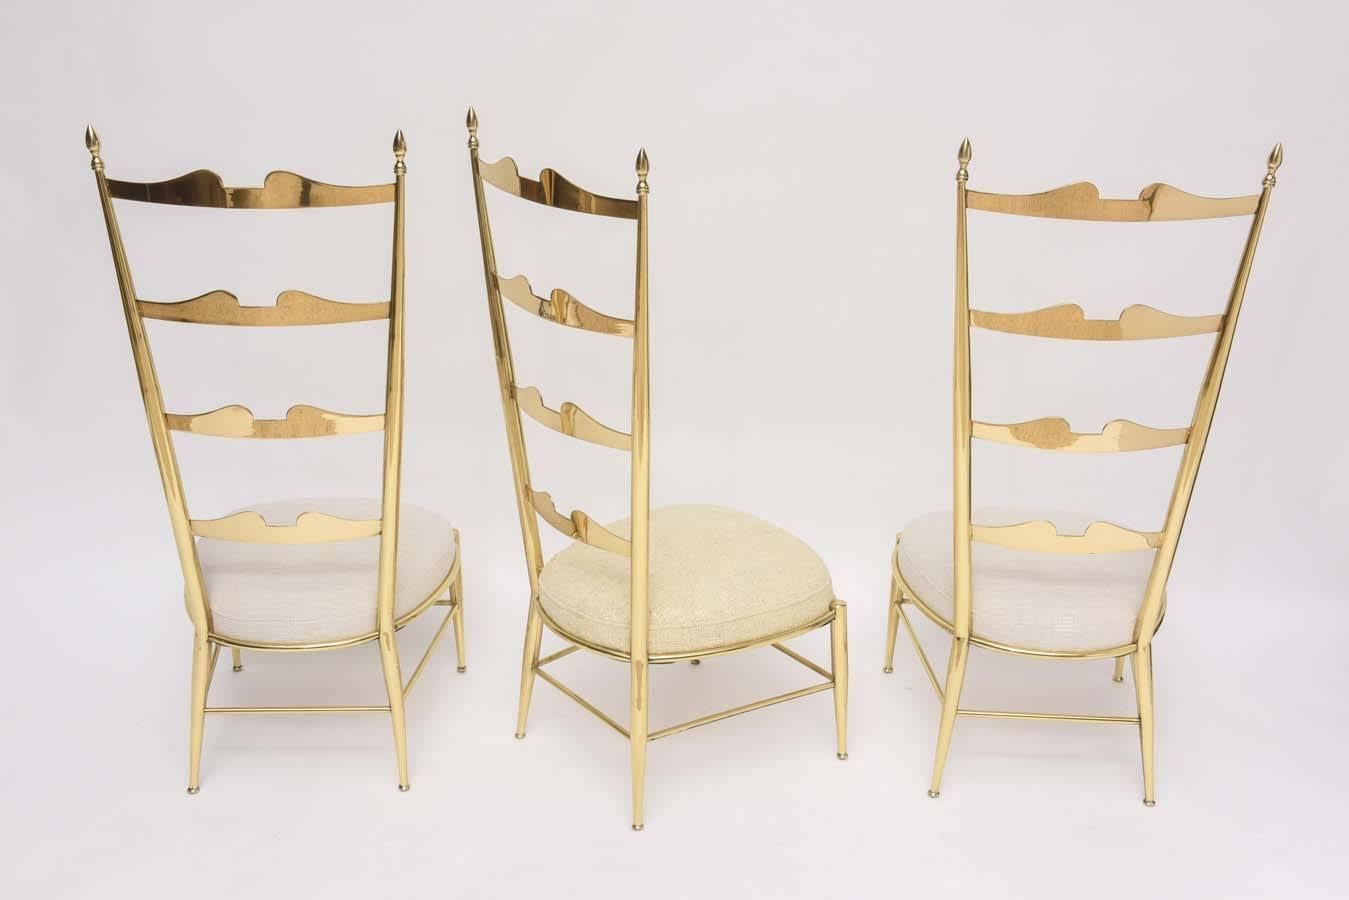 Rare Tall Back Brass Chiavari Chairs with Truncated Legs For Sale 2